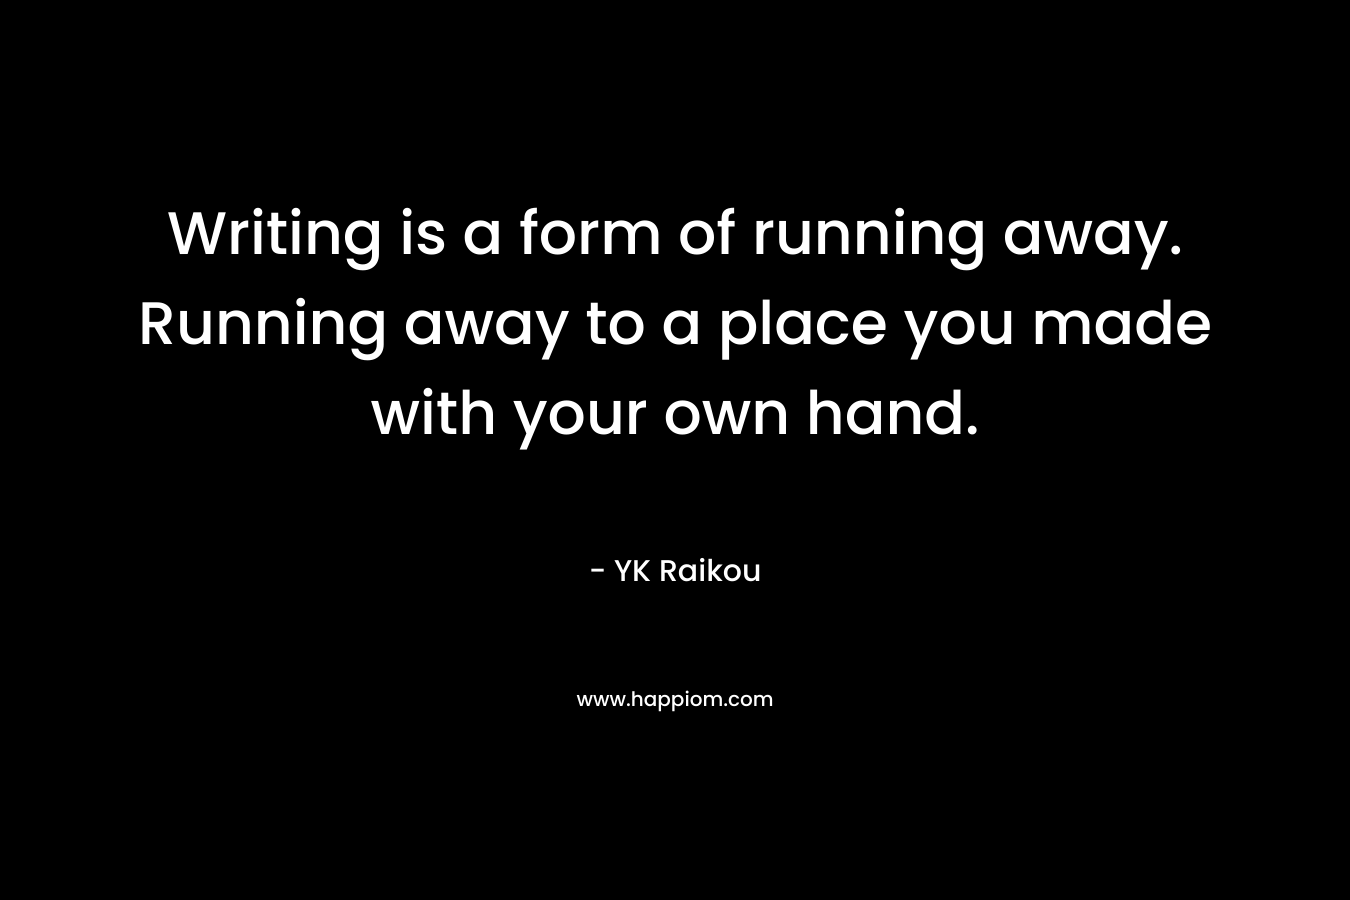 Writing is a form of running away. Running away to a place you made with your own hand.